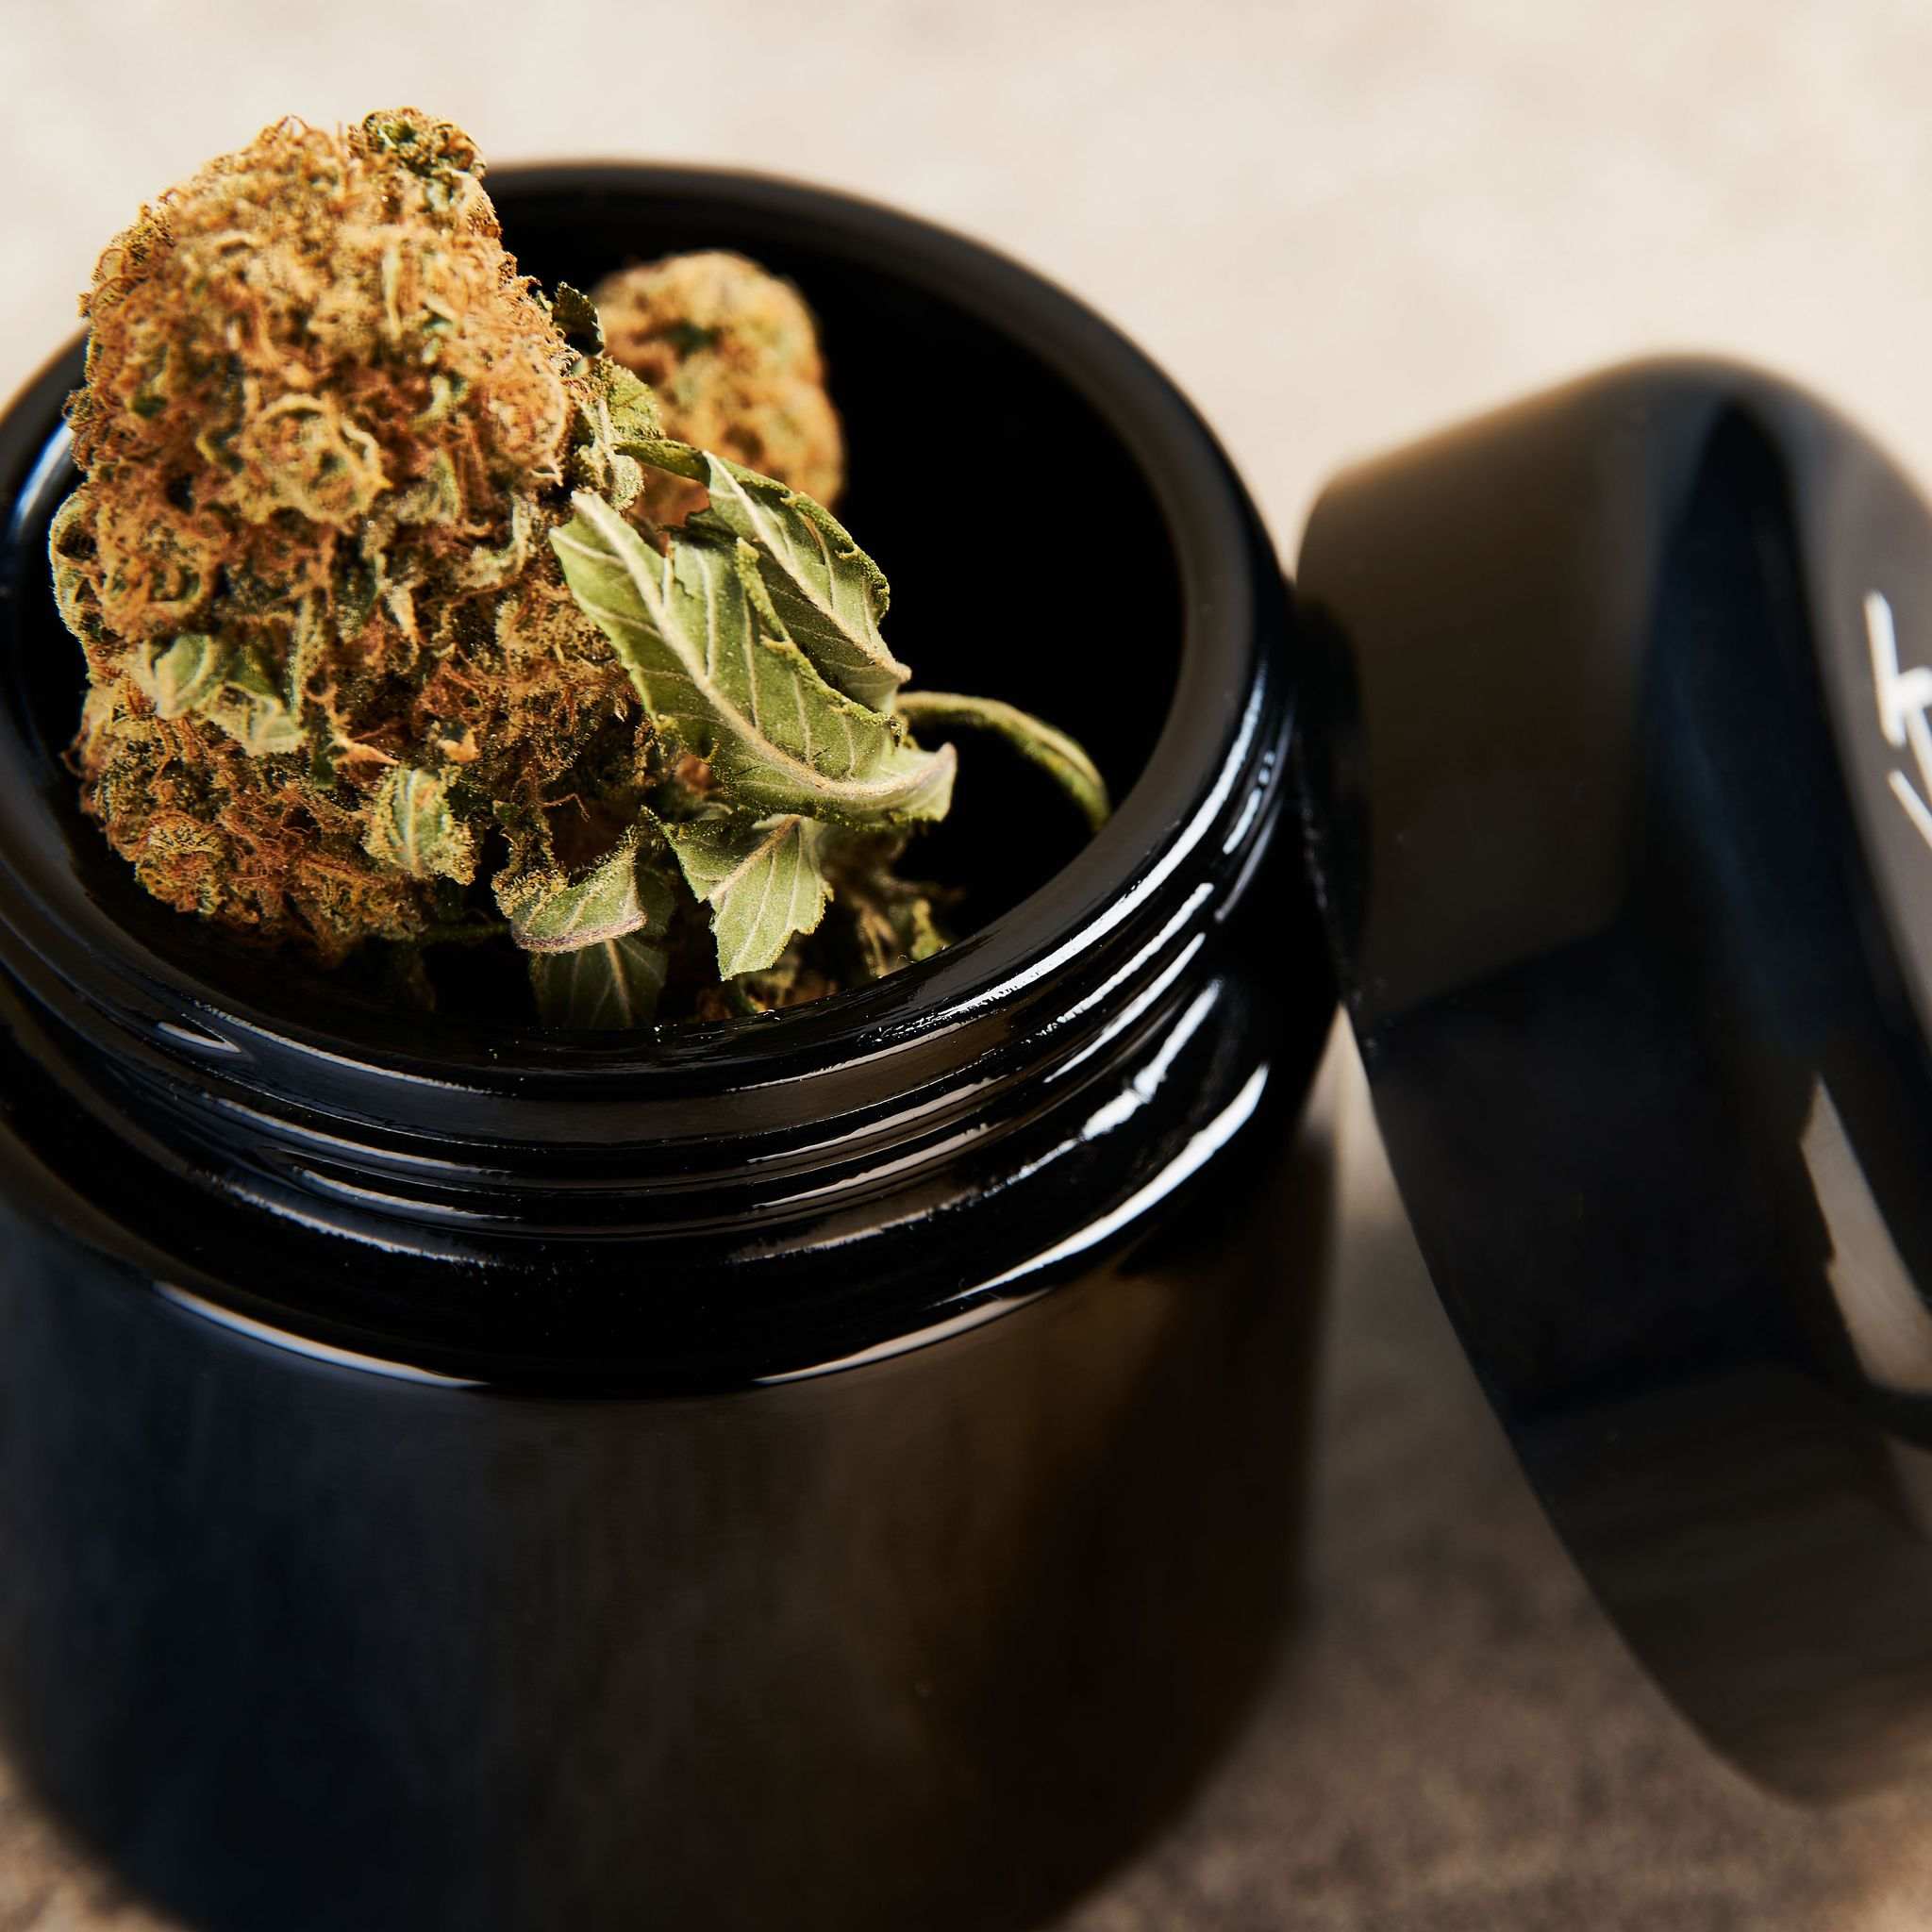 Enhanced strength glass + uv protection + humidity control = extended life for your top-tier flower.  Throw this stash jar in your backpack on the next road trip. 